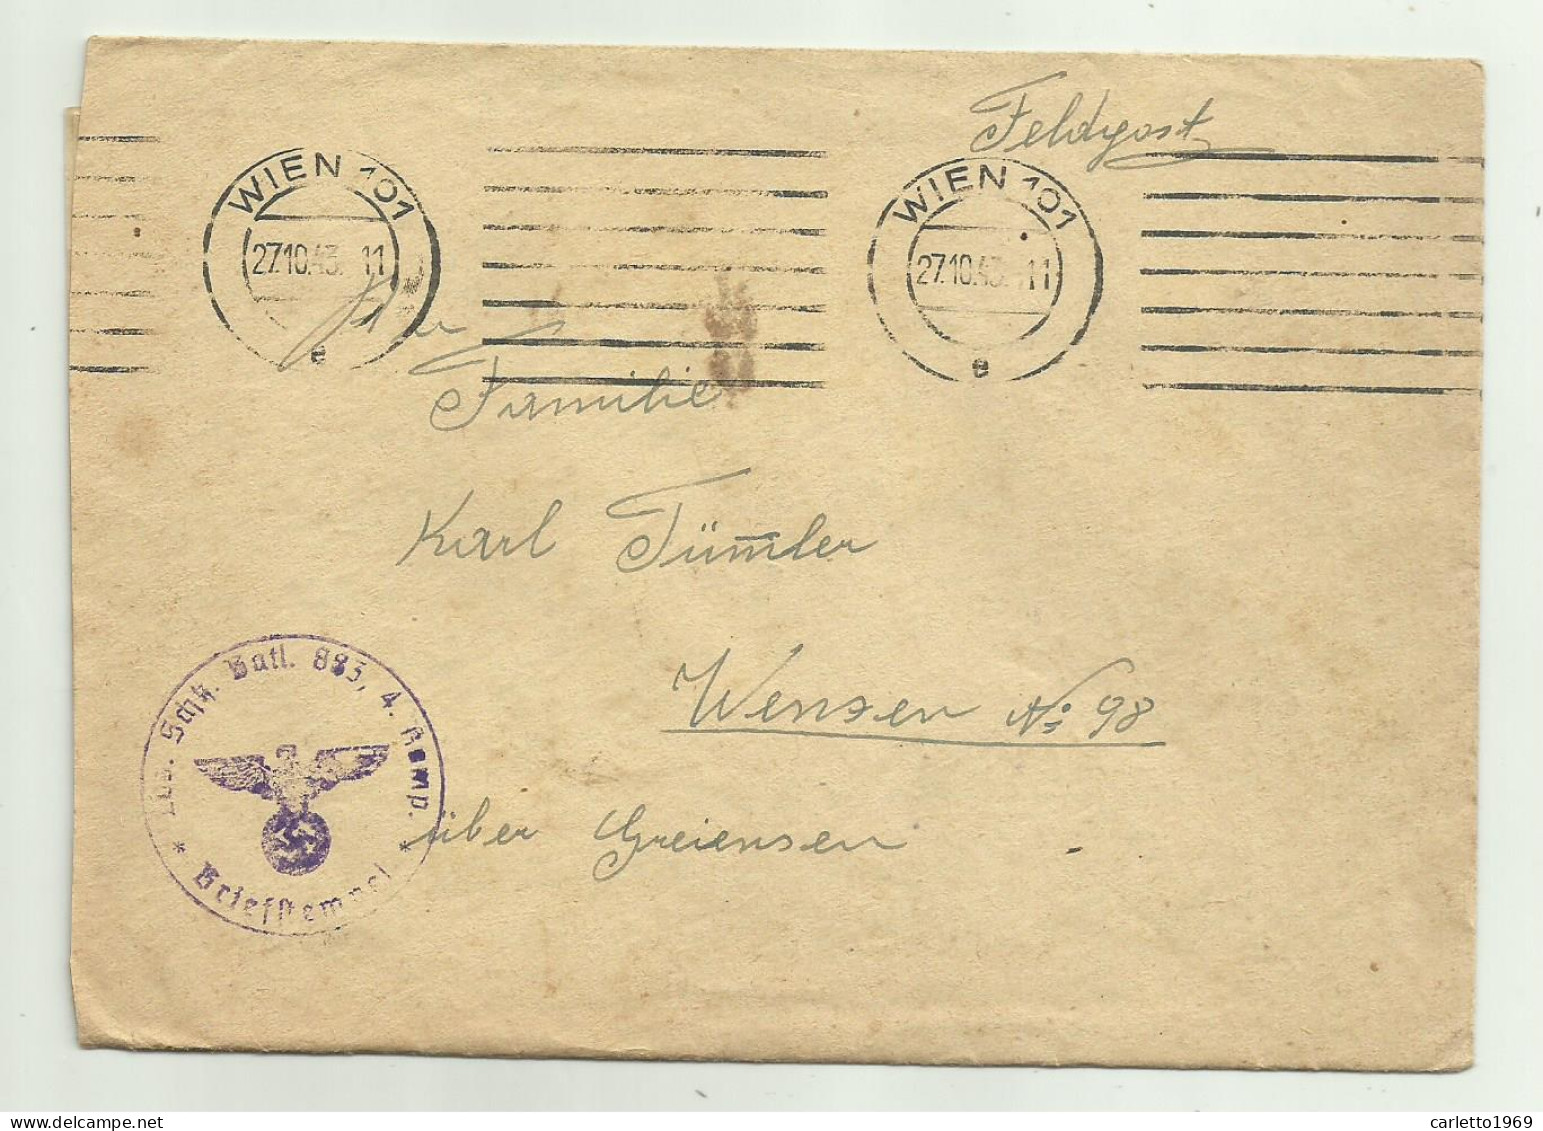  FELDPOST  1943  CON LETTERA  - Used Stamps